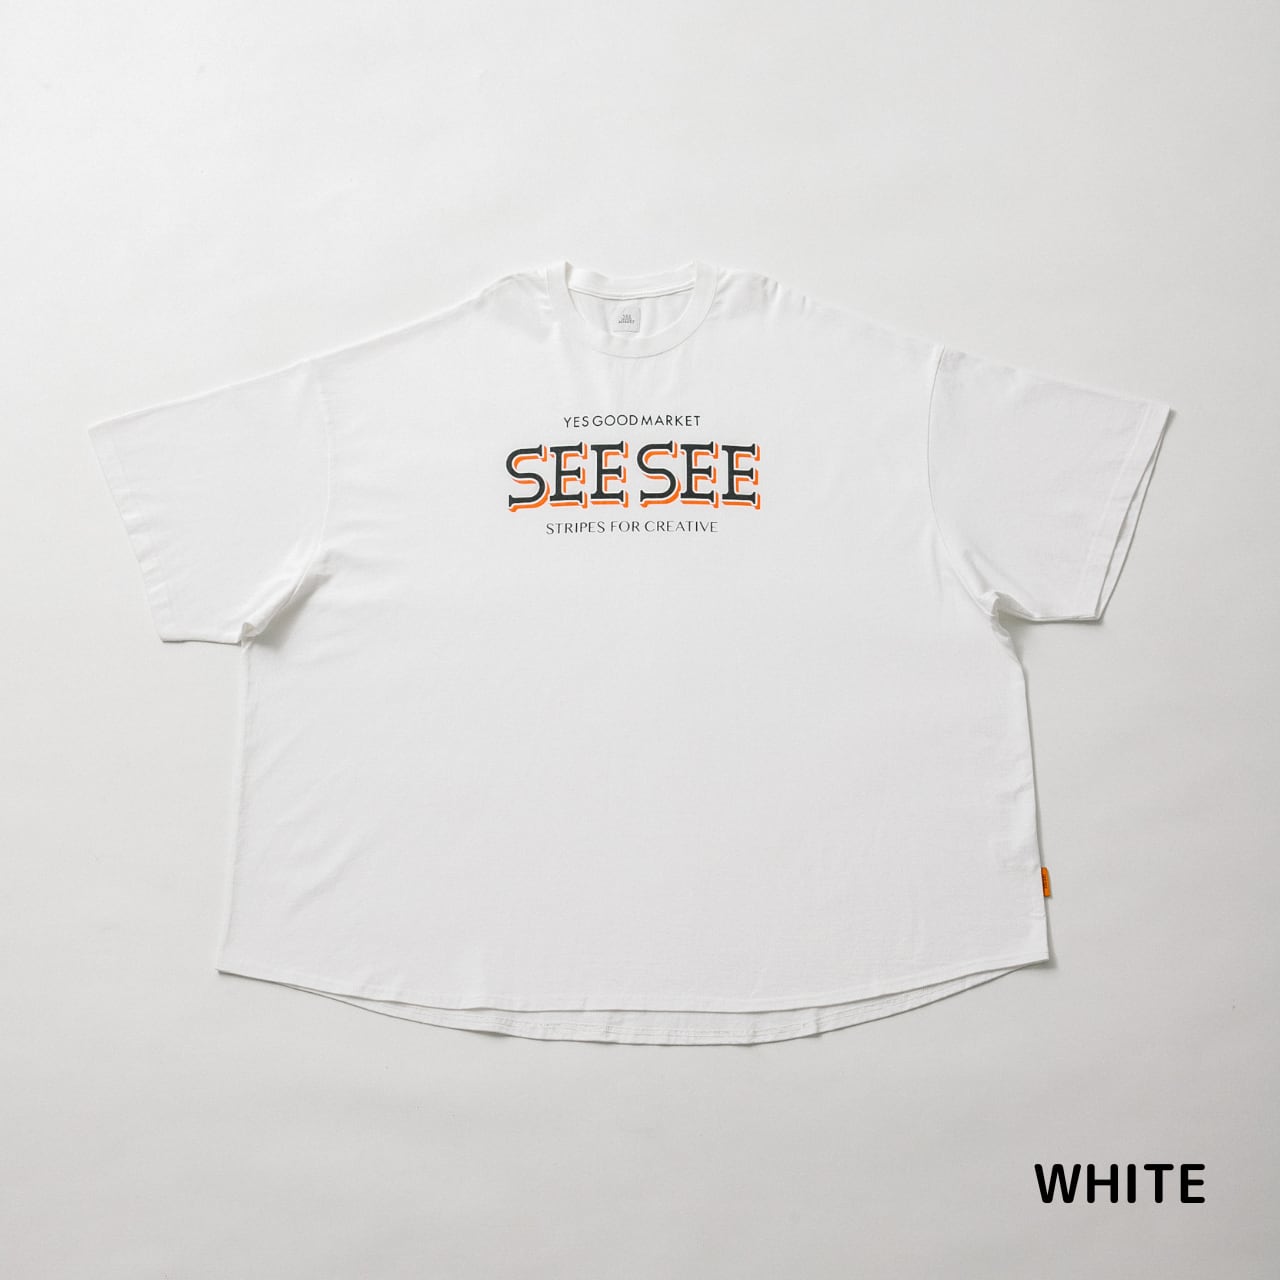 YGM×SEE SEE×S.F.C SUPER BIG ROUND TEE | Yes Good Market ONLINE